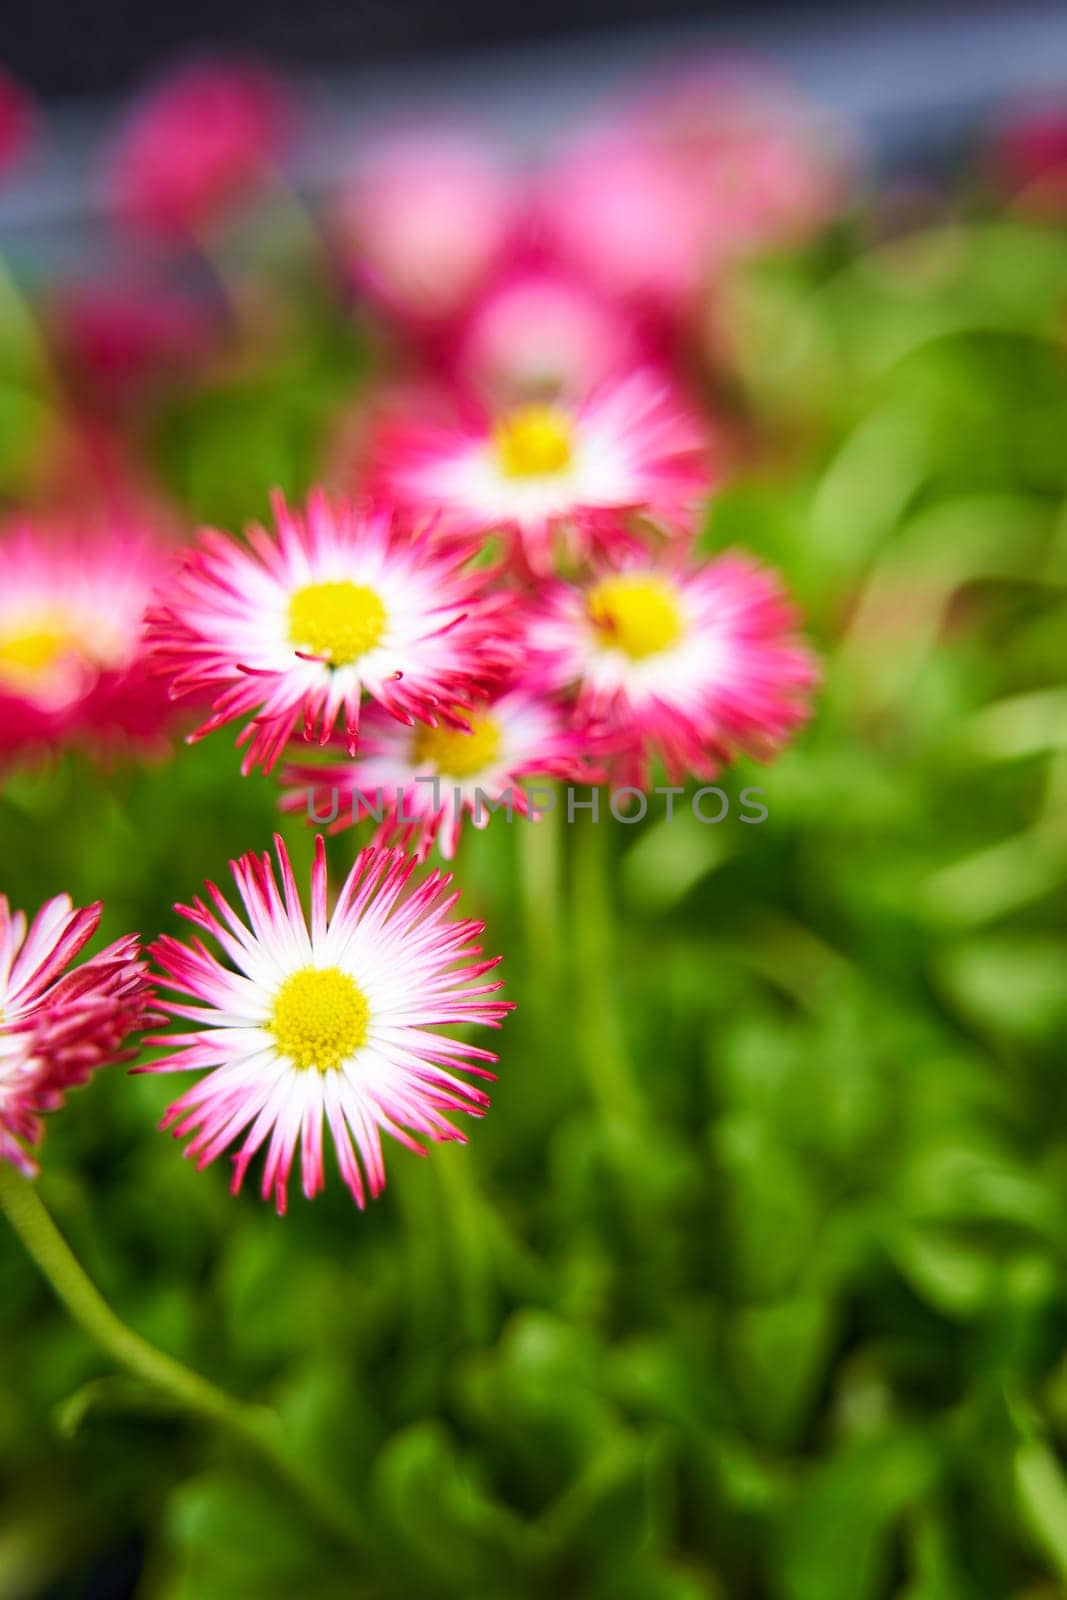 Pink chamomile flower in the green grass.